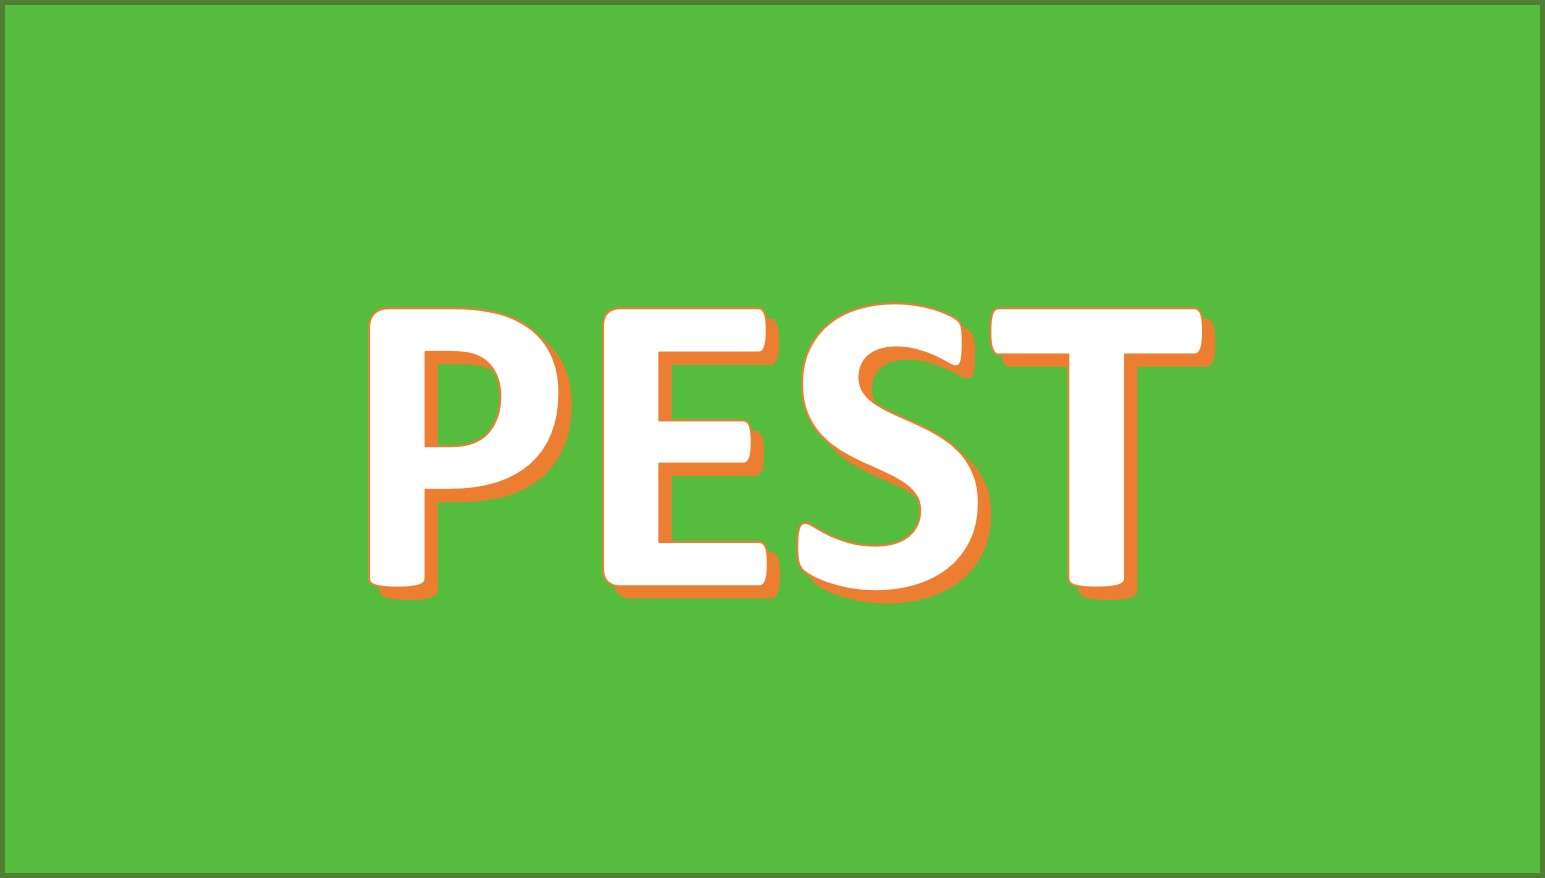 PEST Analisys puzzle online from photo